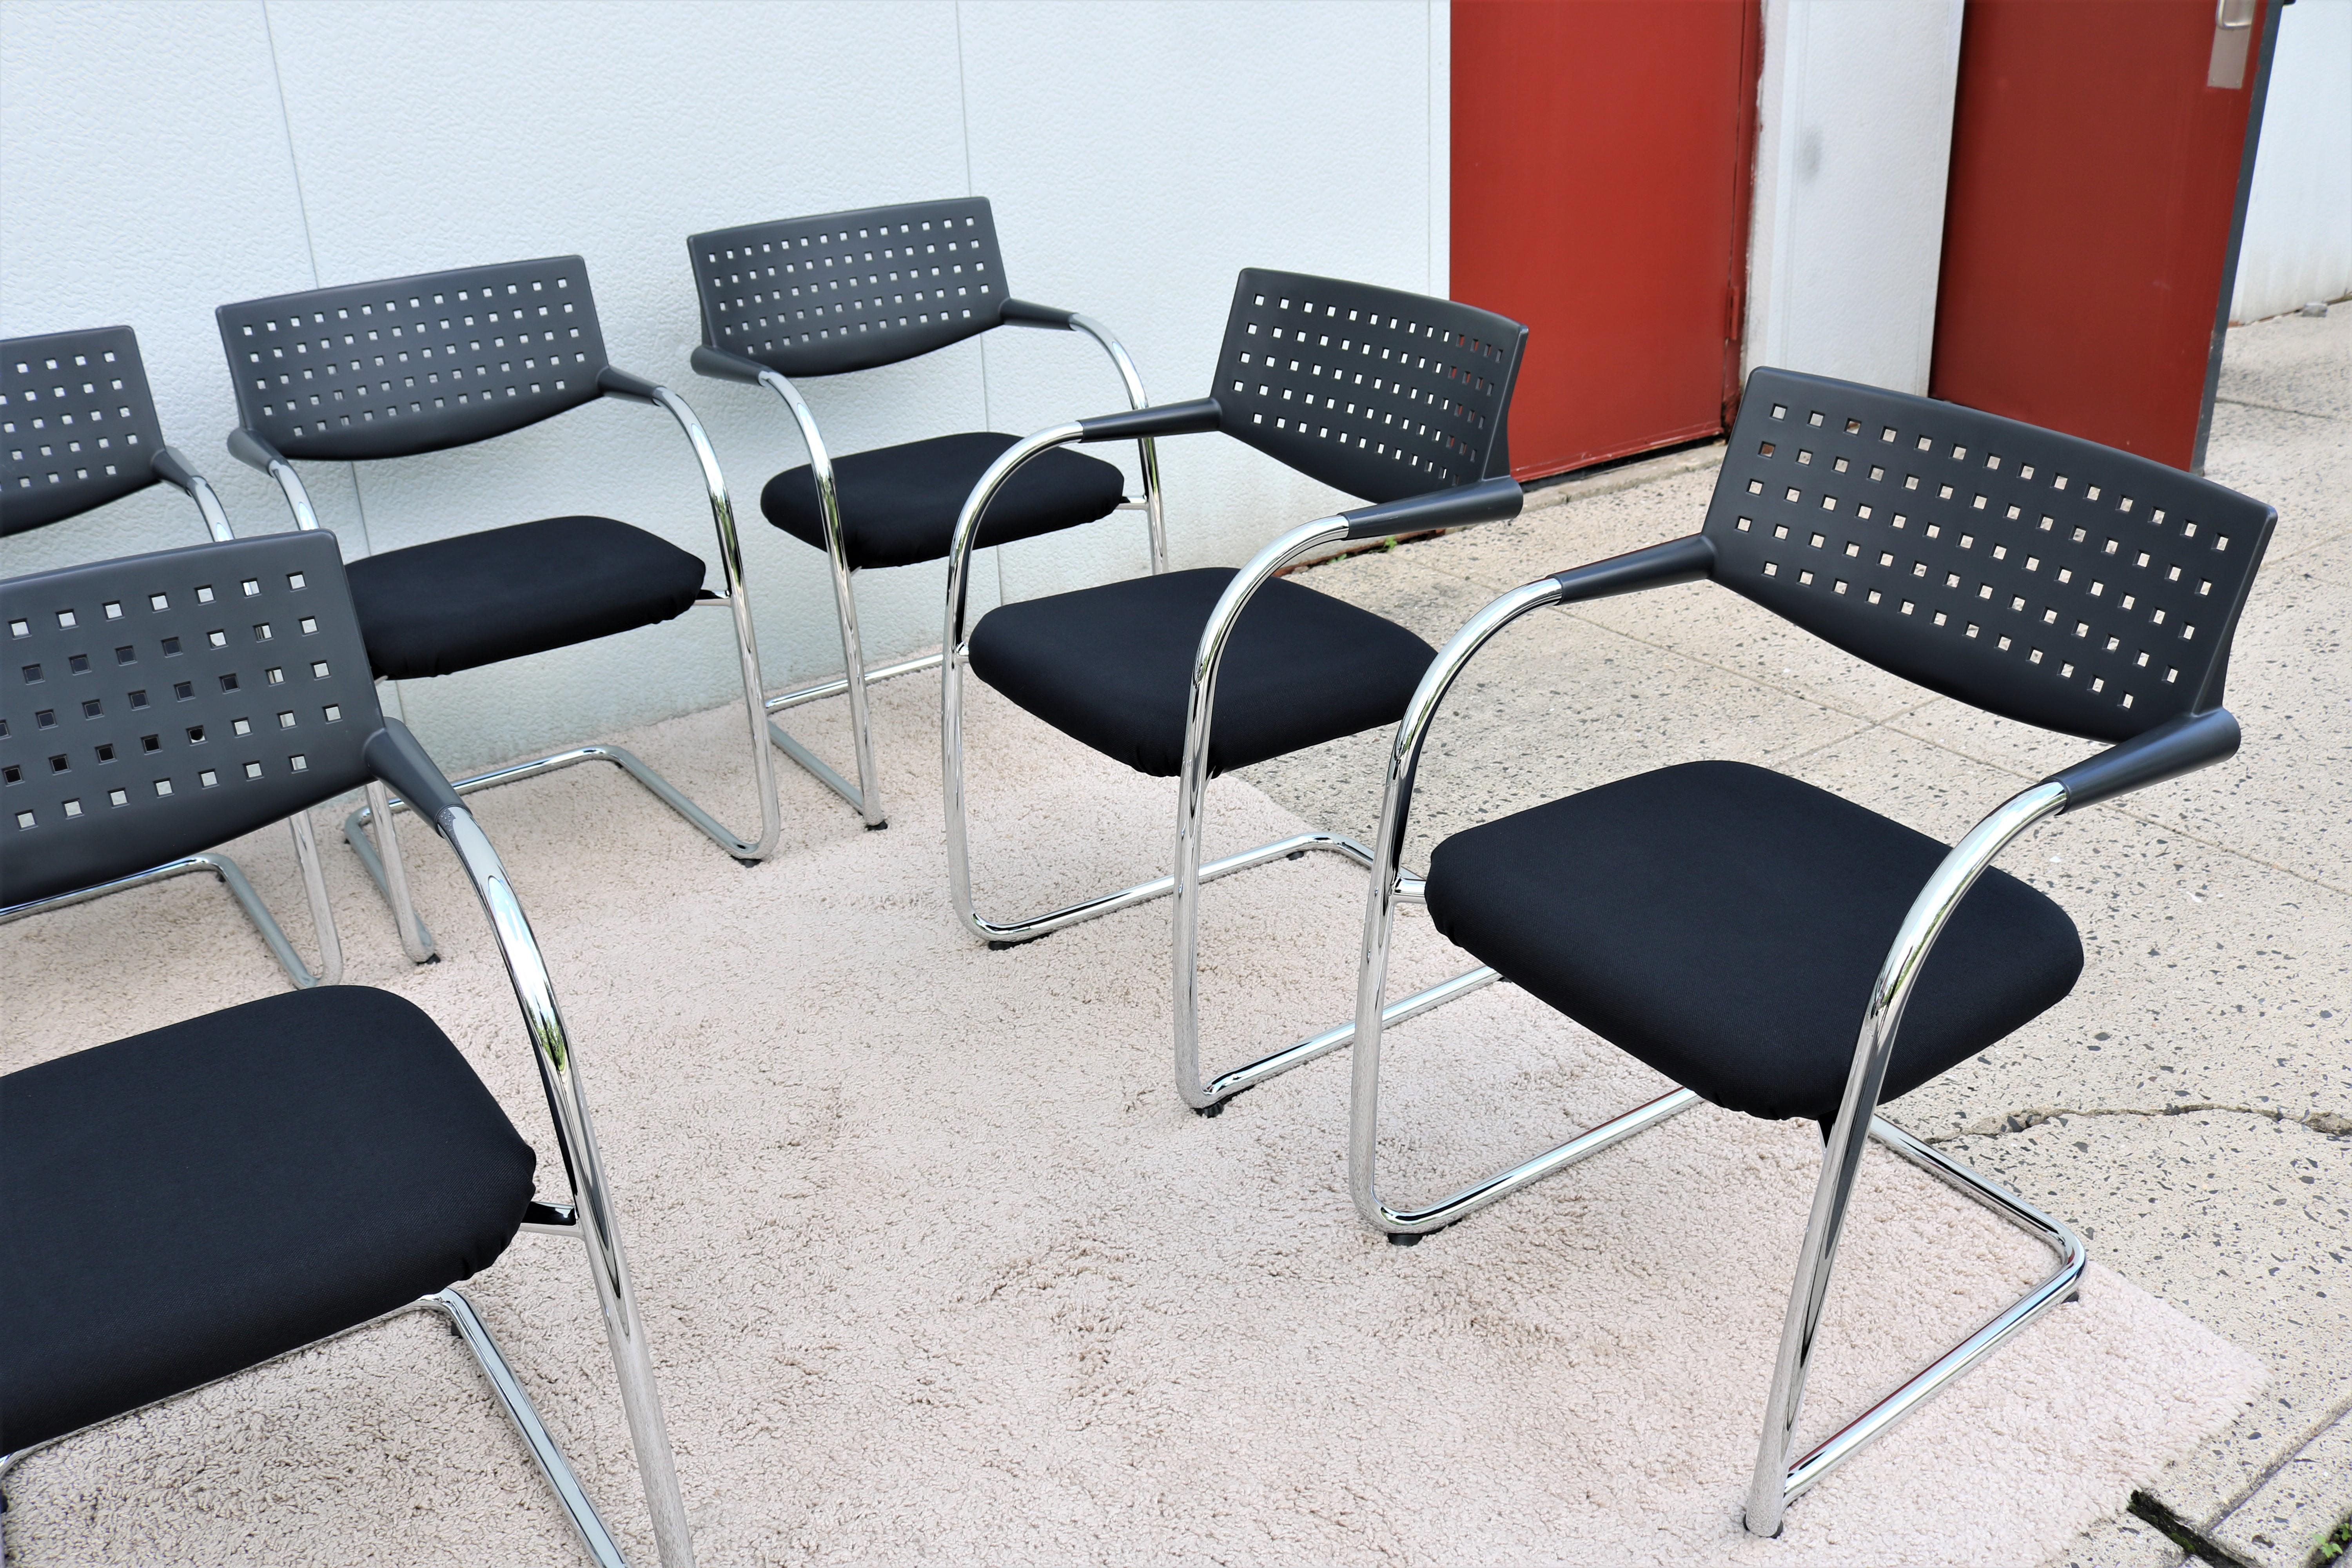 Plated Modern Antonio Citterio for Vitra Visasoft Visavis Conference Chairs, Set of 10 For Sale